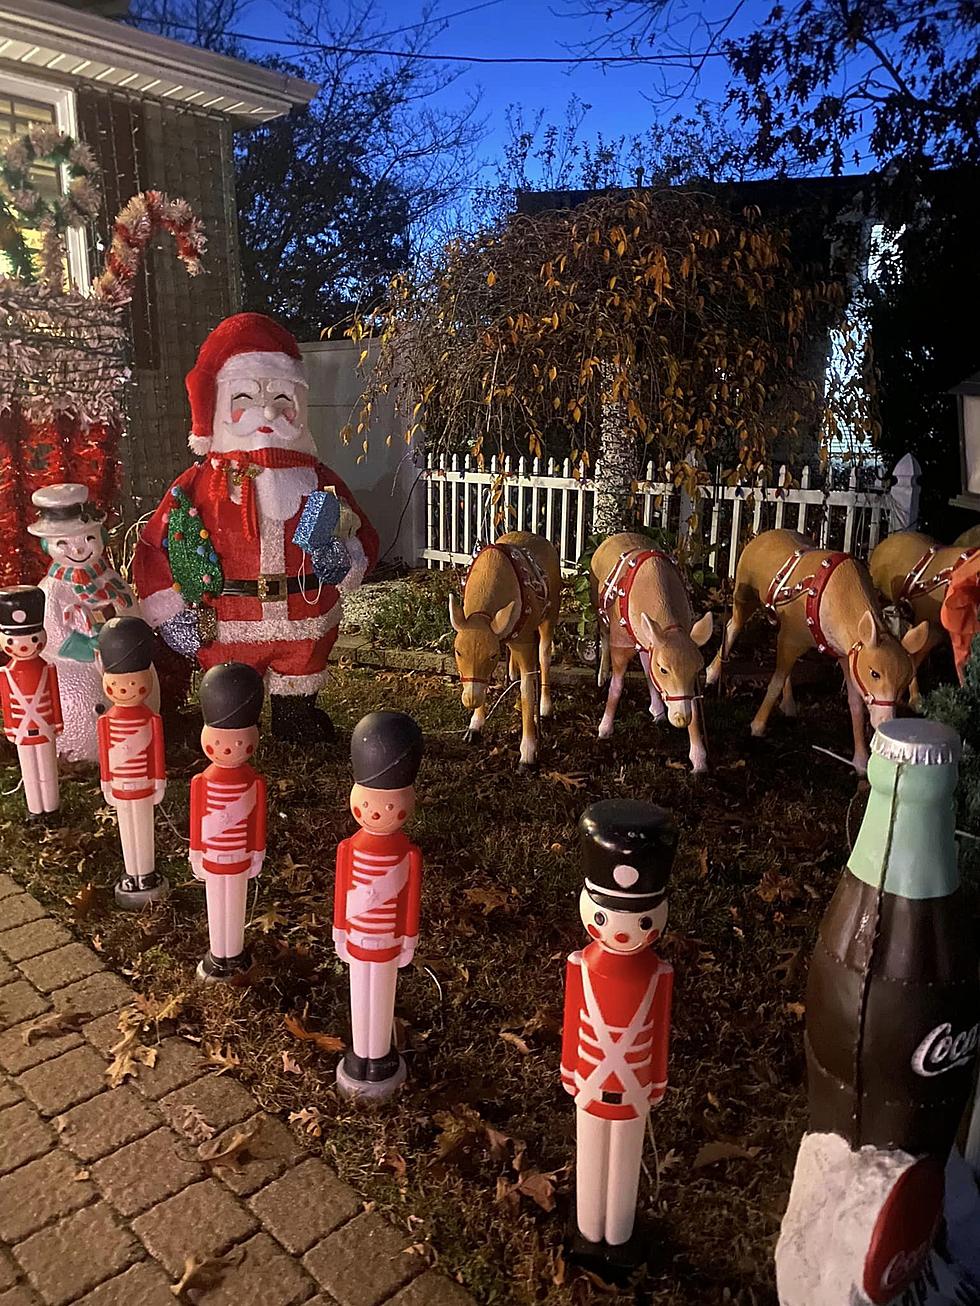 Amazing Christmas Spirit in Brick at this Decorated House